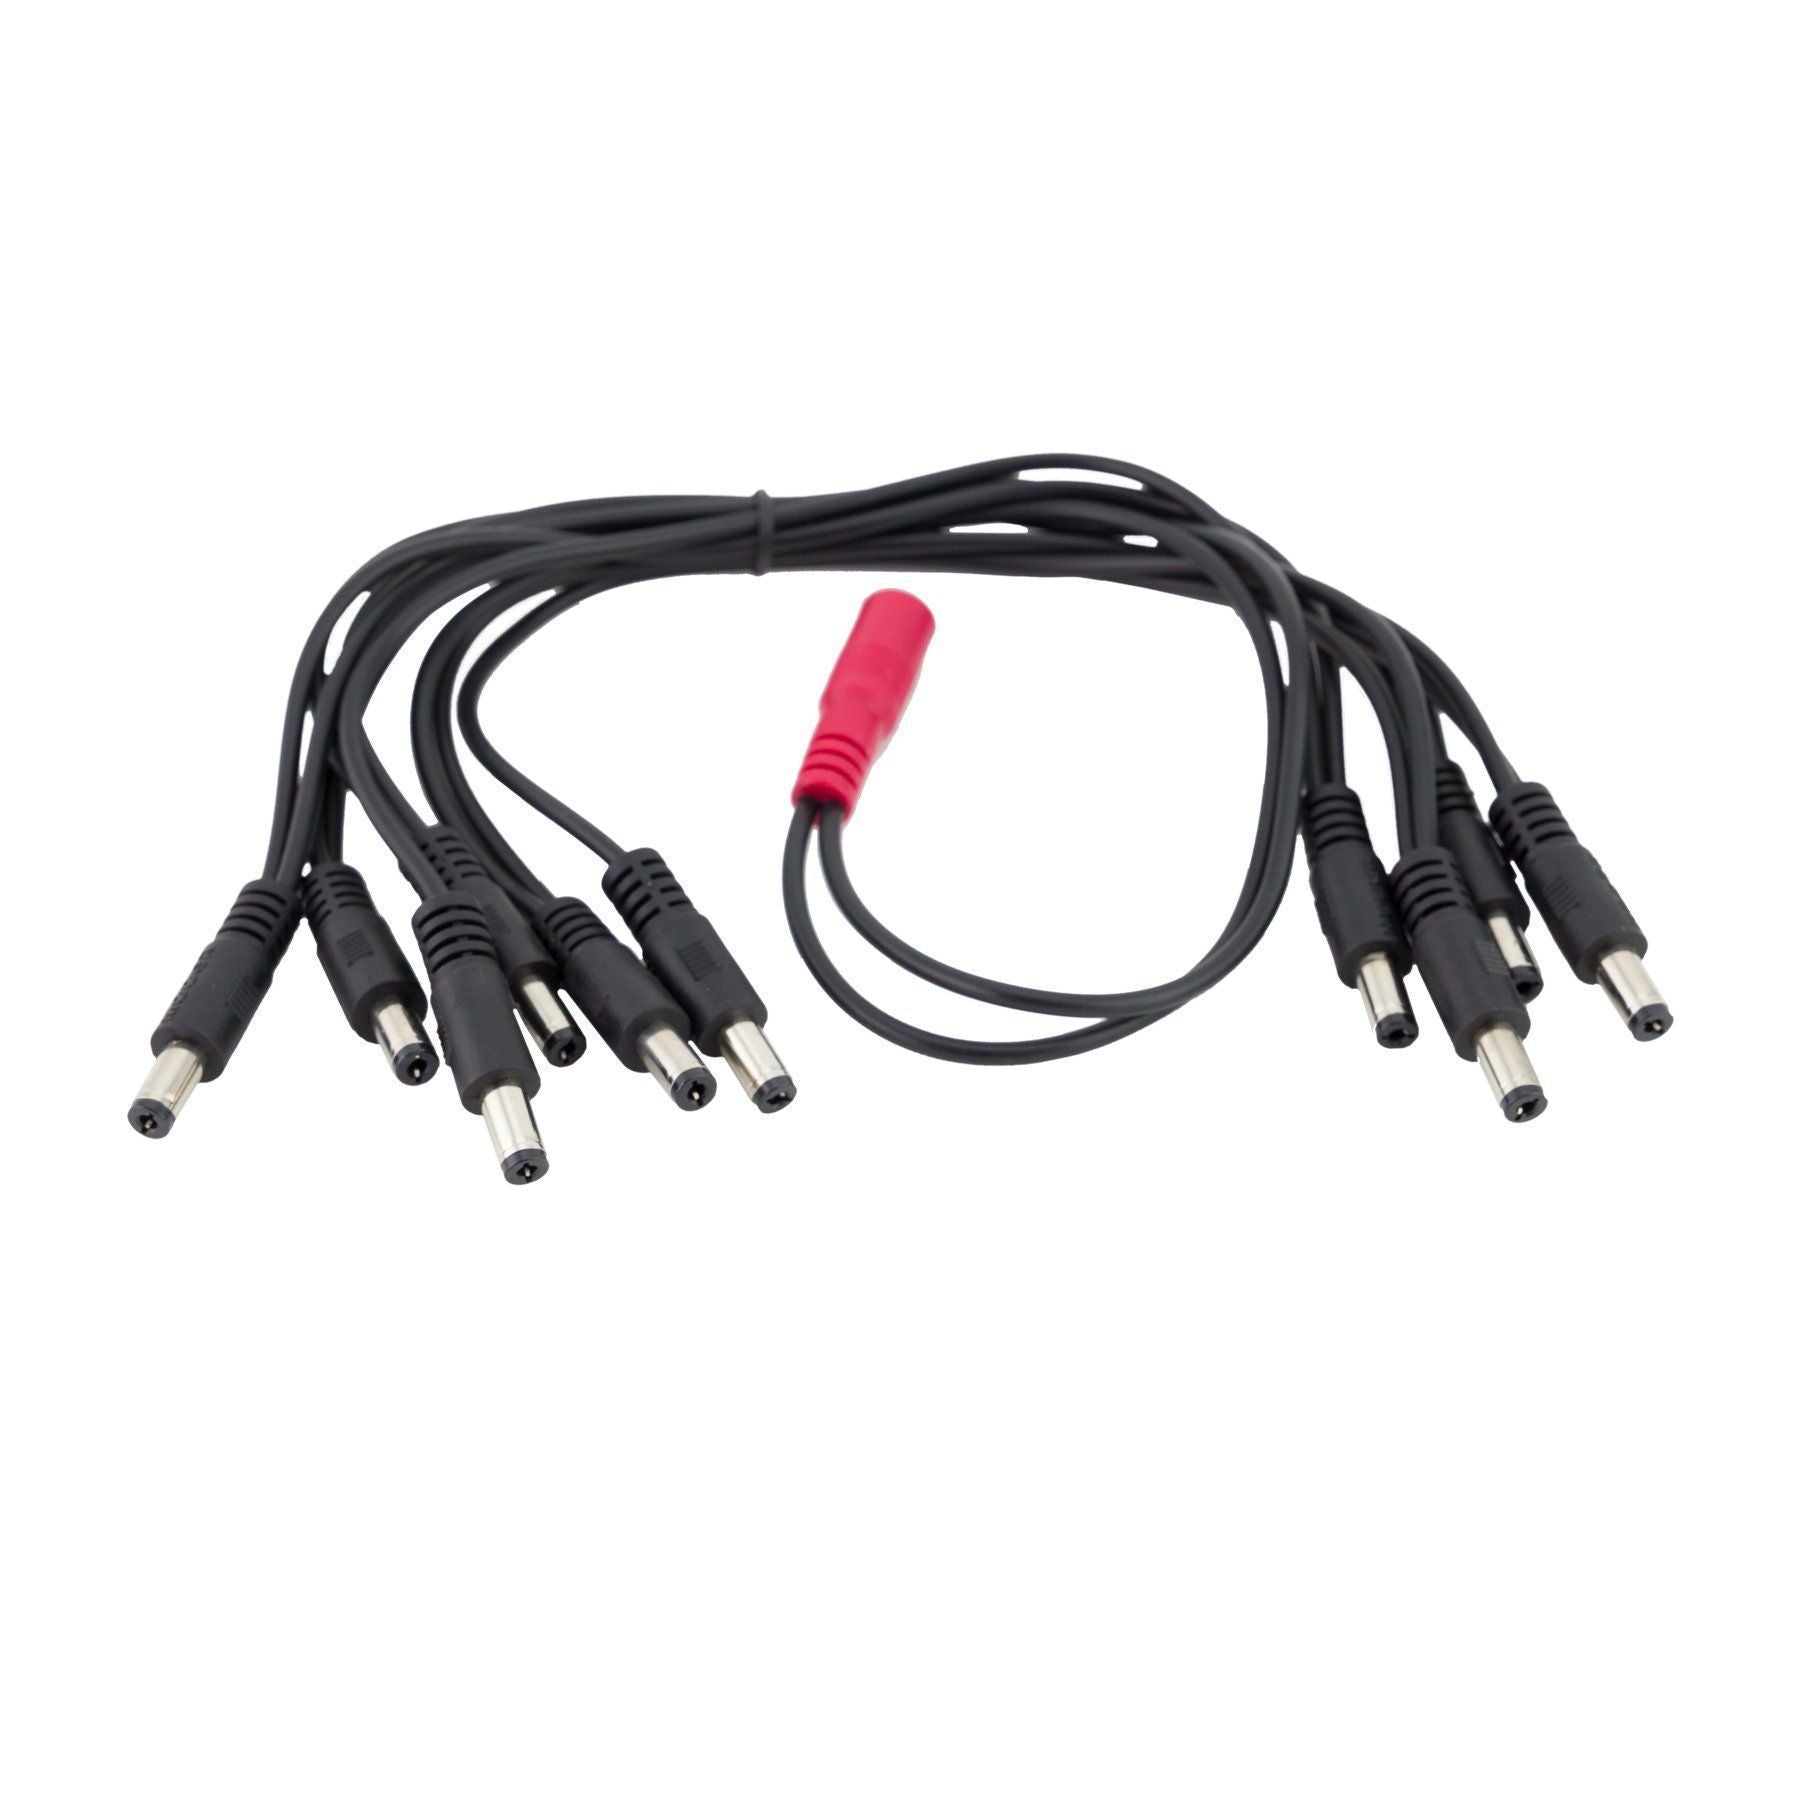 Mooer 10-Plug DC Daisy Chain Pedal Power Cable (Straight Plugs)-MEP-PDC-10S